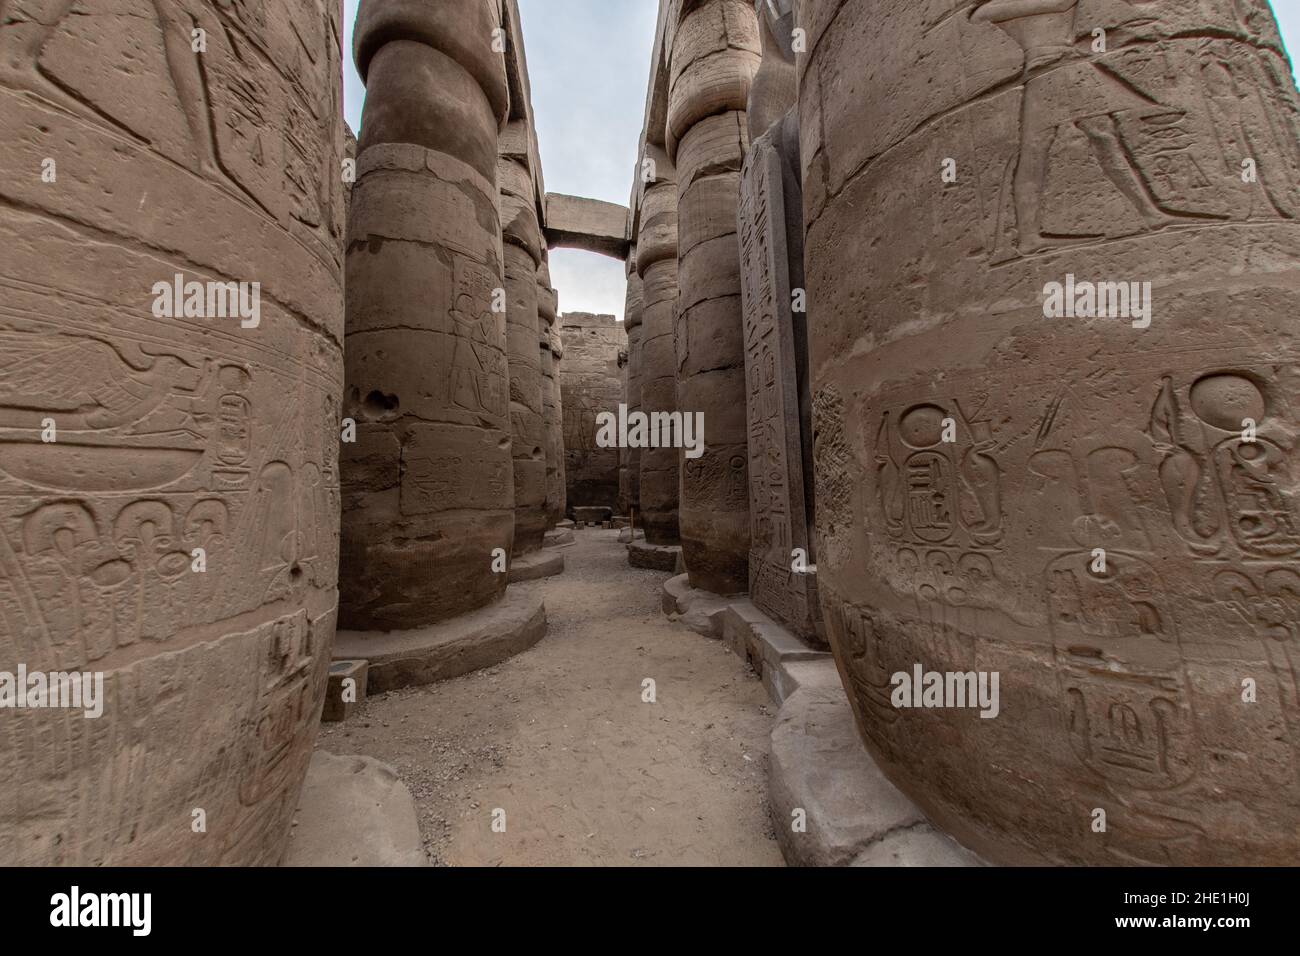 Stone pillars and carvings in Luxor temple, a historic monument in Egypt. Stock Photo